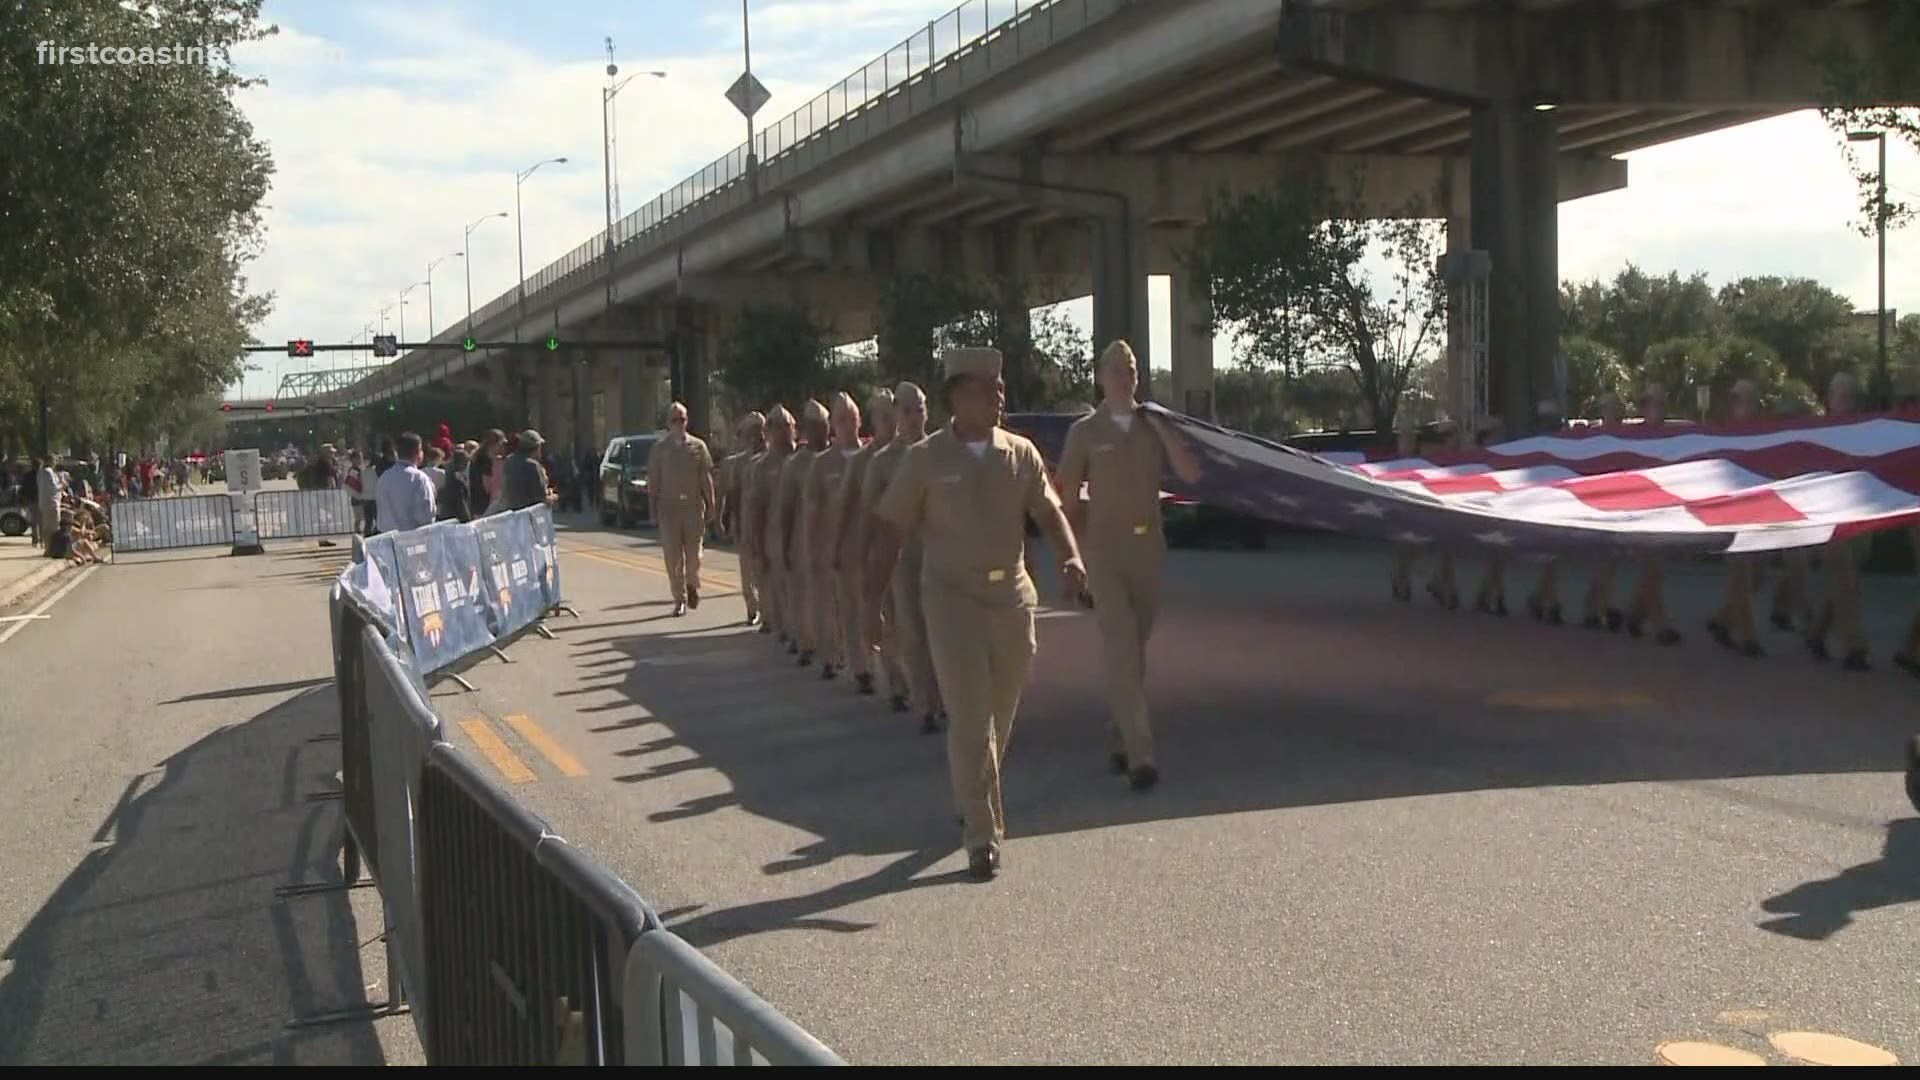 This patriotic parade will feature grand marshals, senior military officials, marching bands and much more.